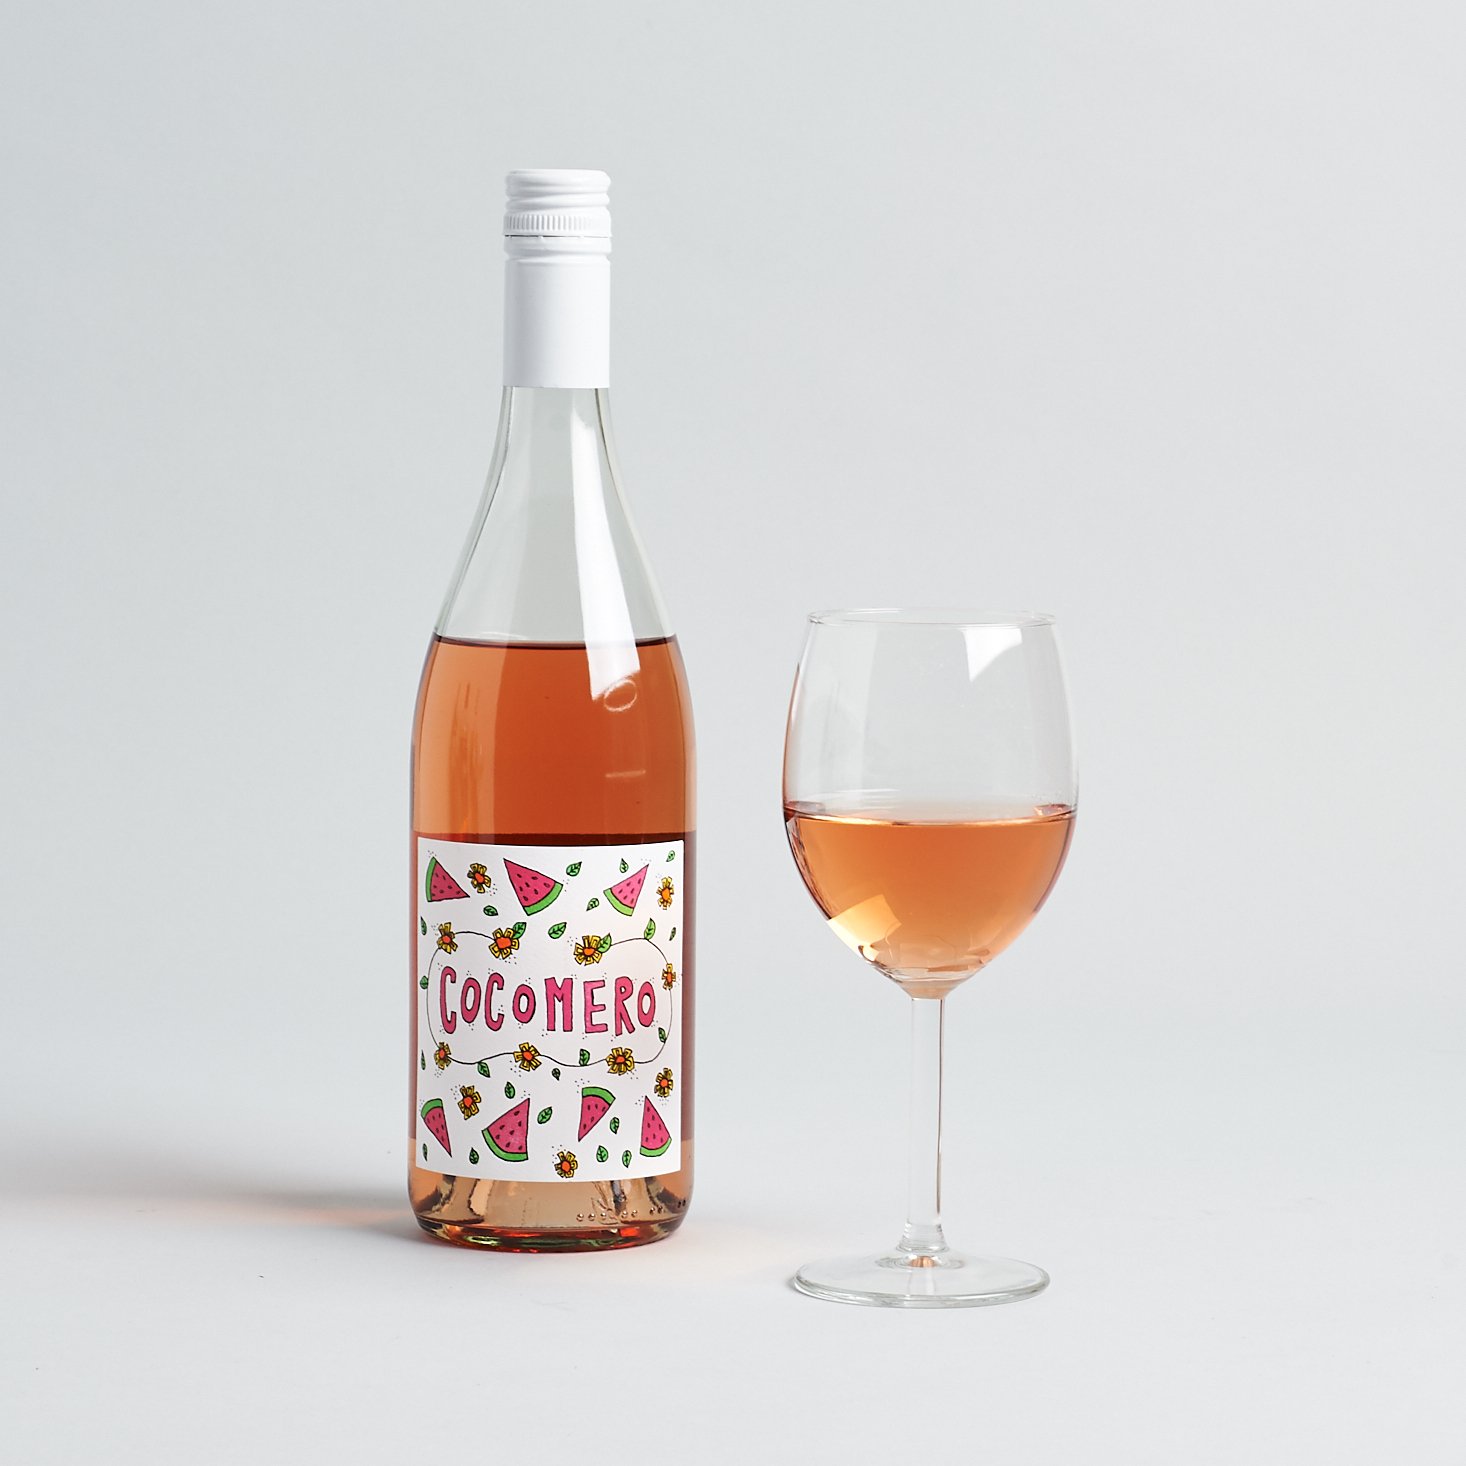 cocomero rose open bottle and glass